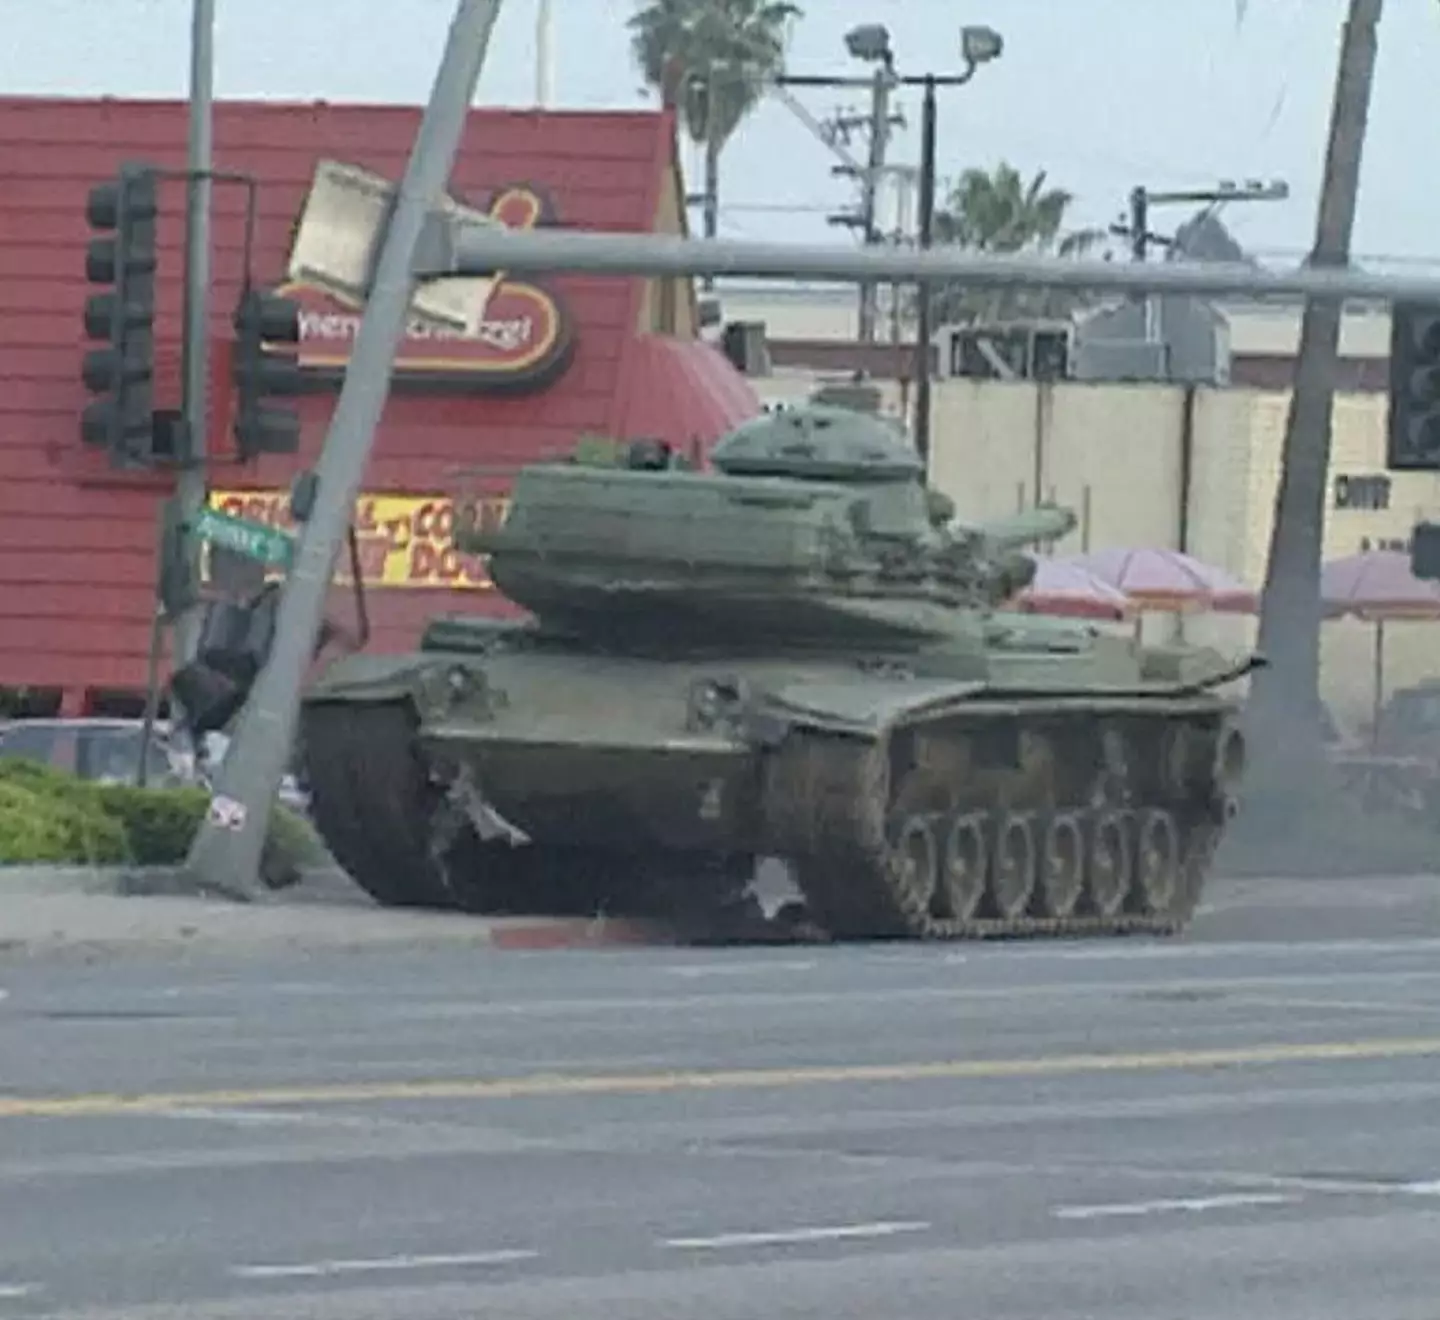 Police eventually intercepted the tank.